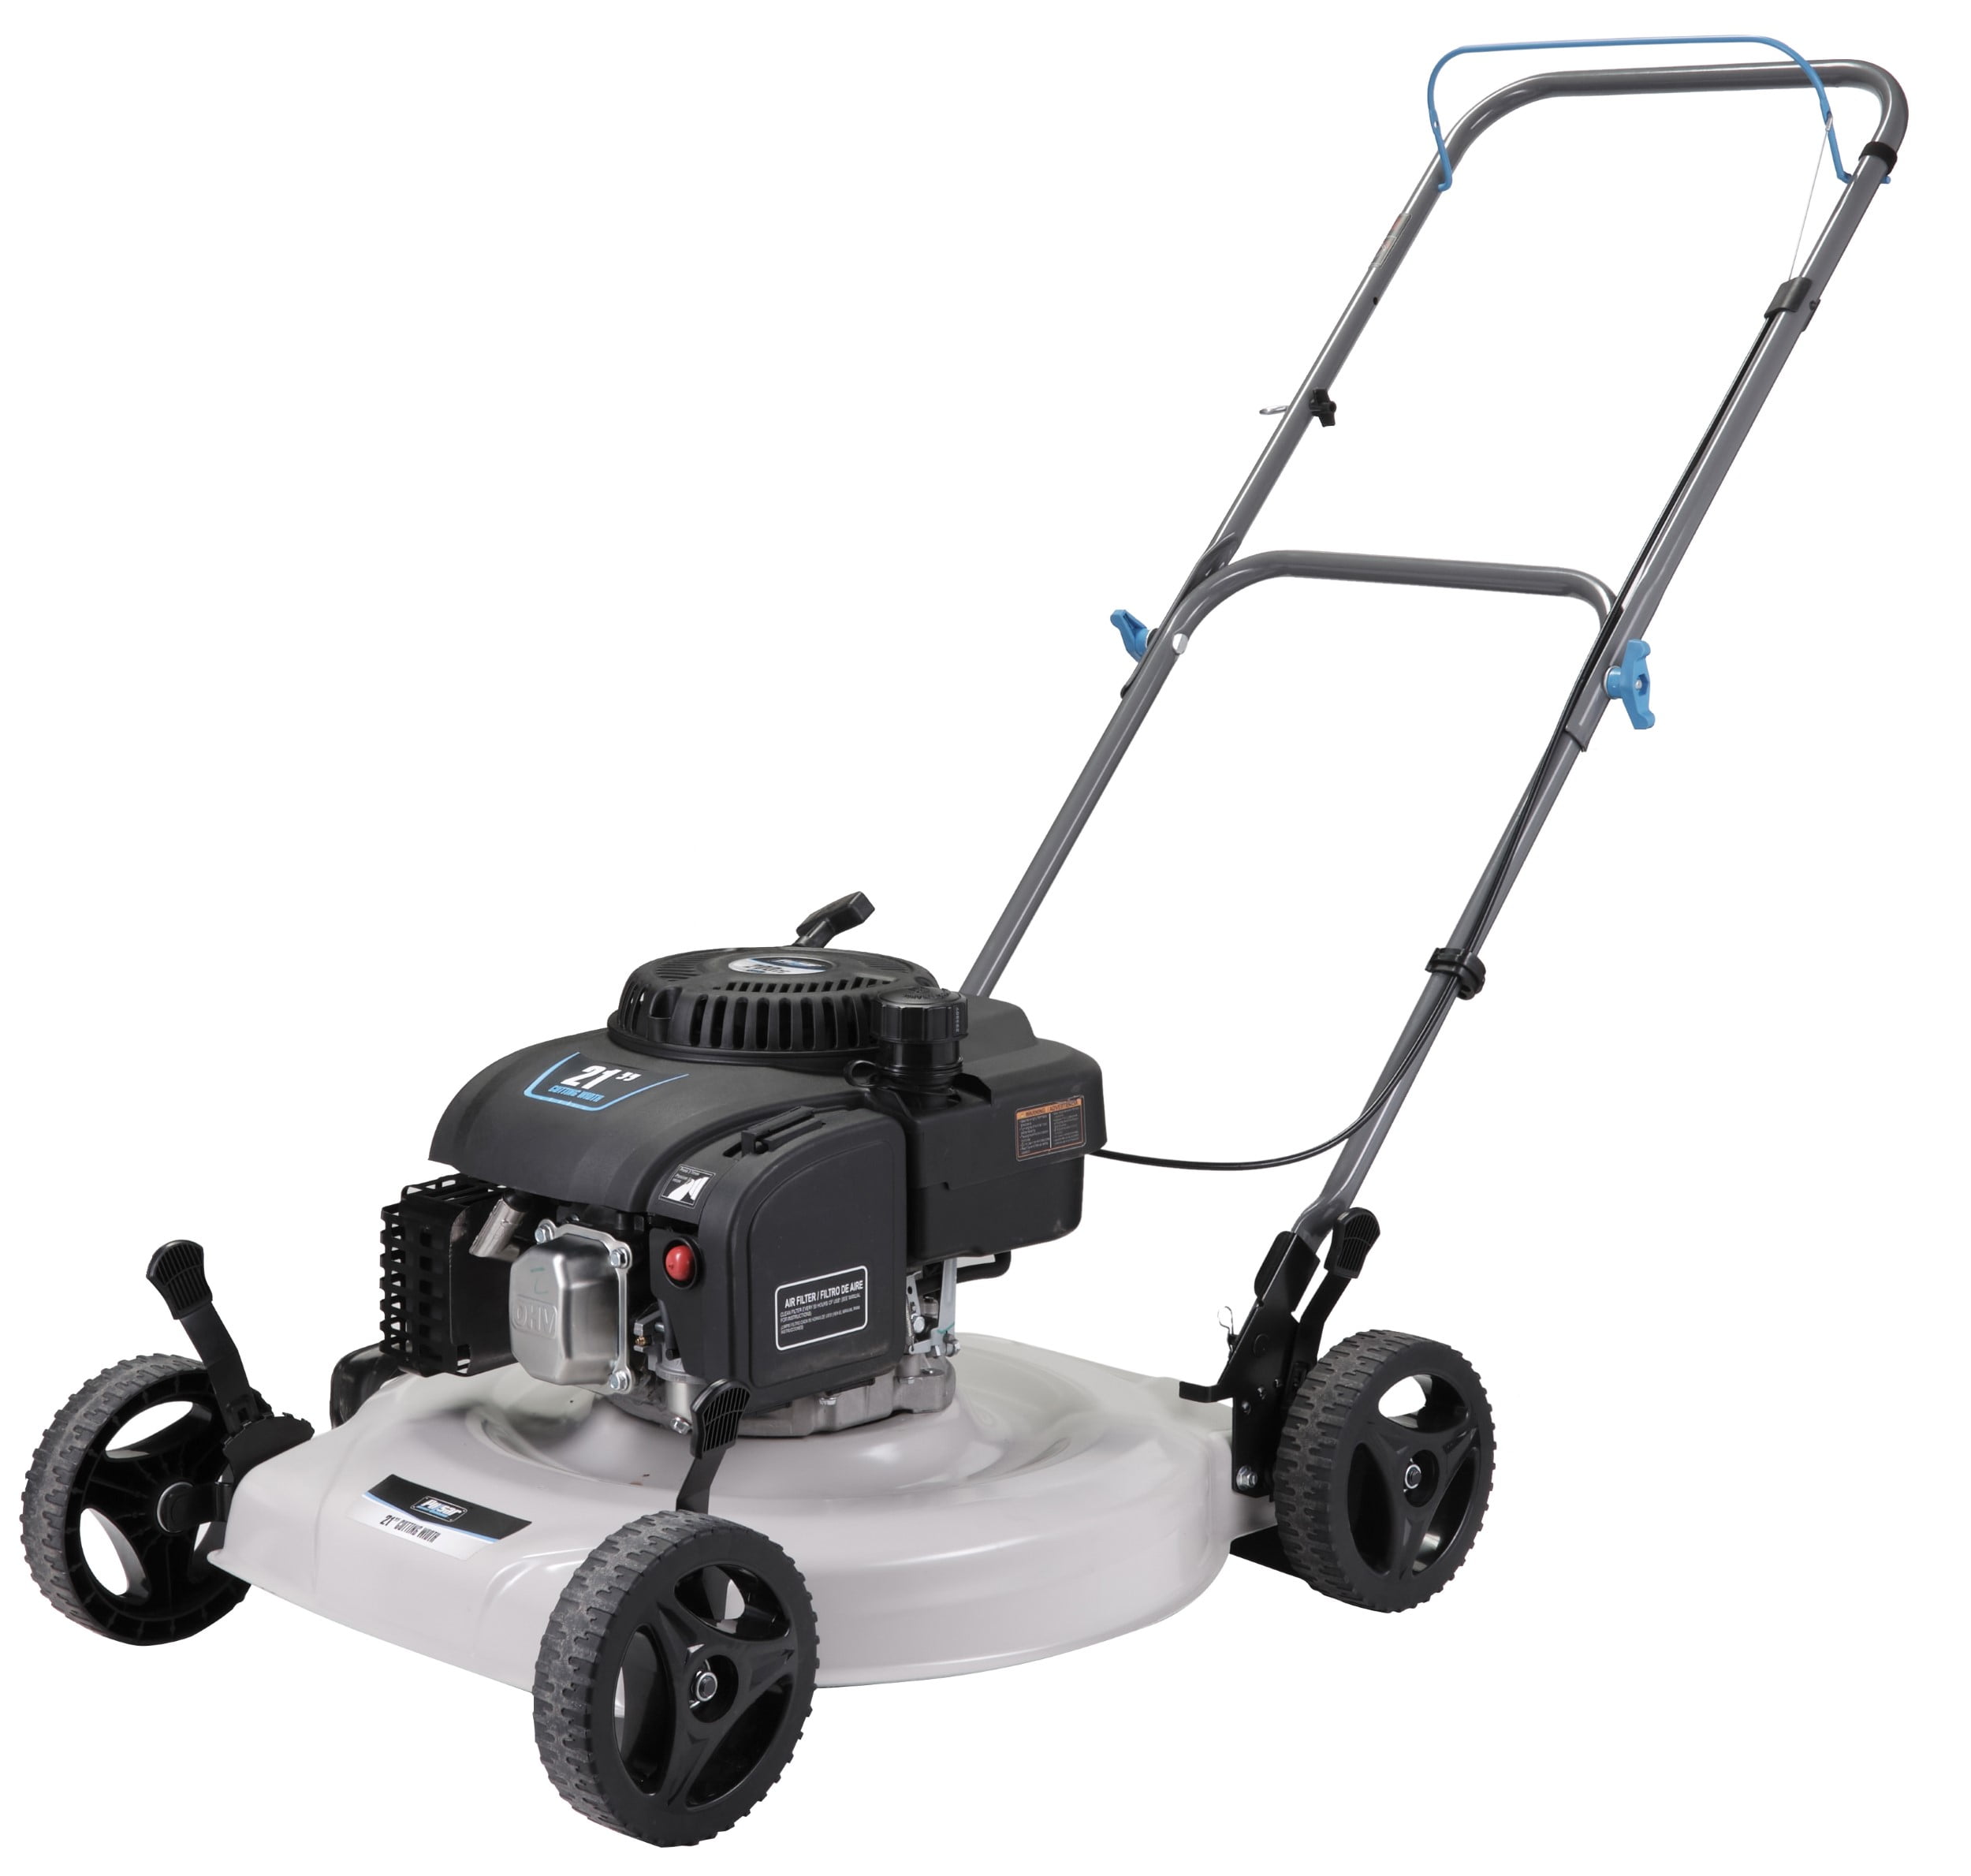 Pulsar 21 Cutting Path Lawn Mower with Side Discharge & 5